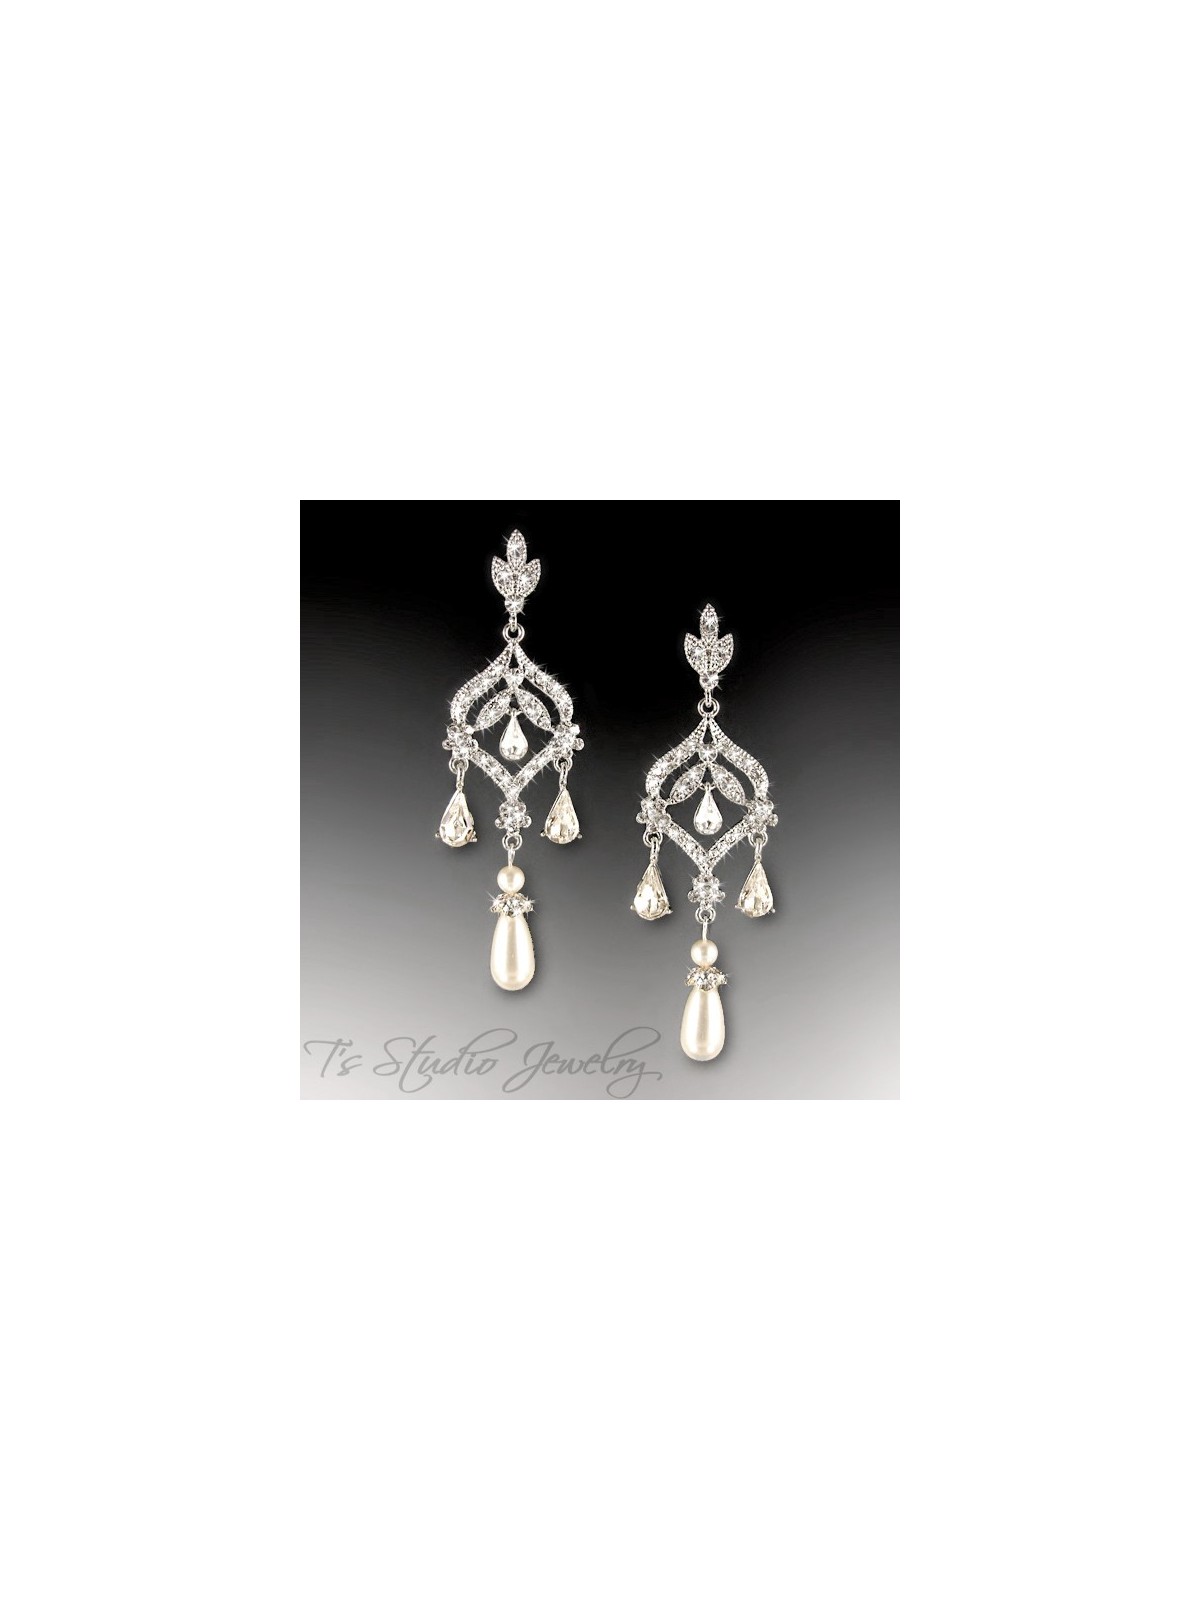 Long Teardrop Pearl Chandelier Bridal Earrings - Silver and Crystal Earings with white ivory or champagne pearls